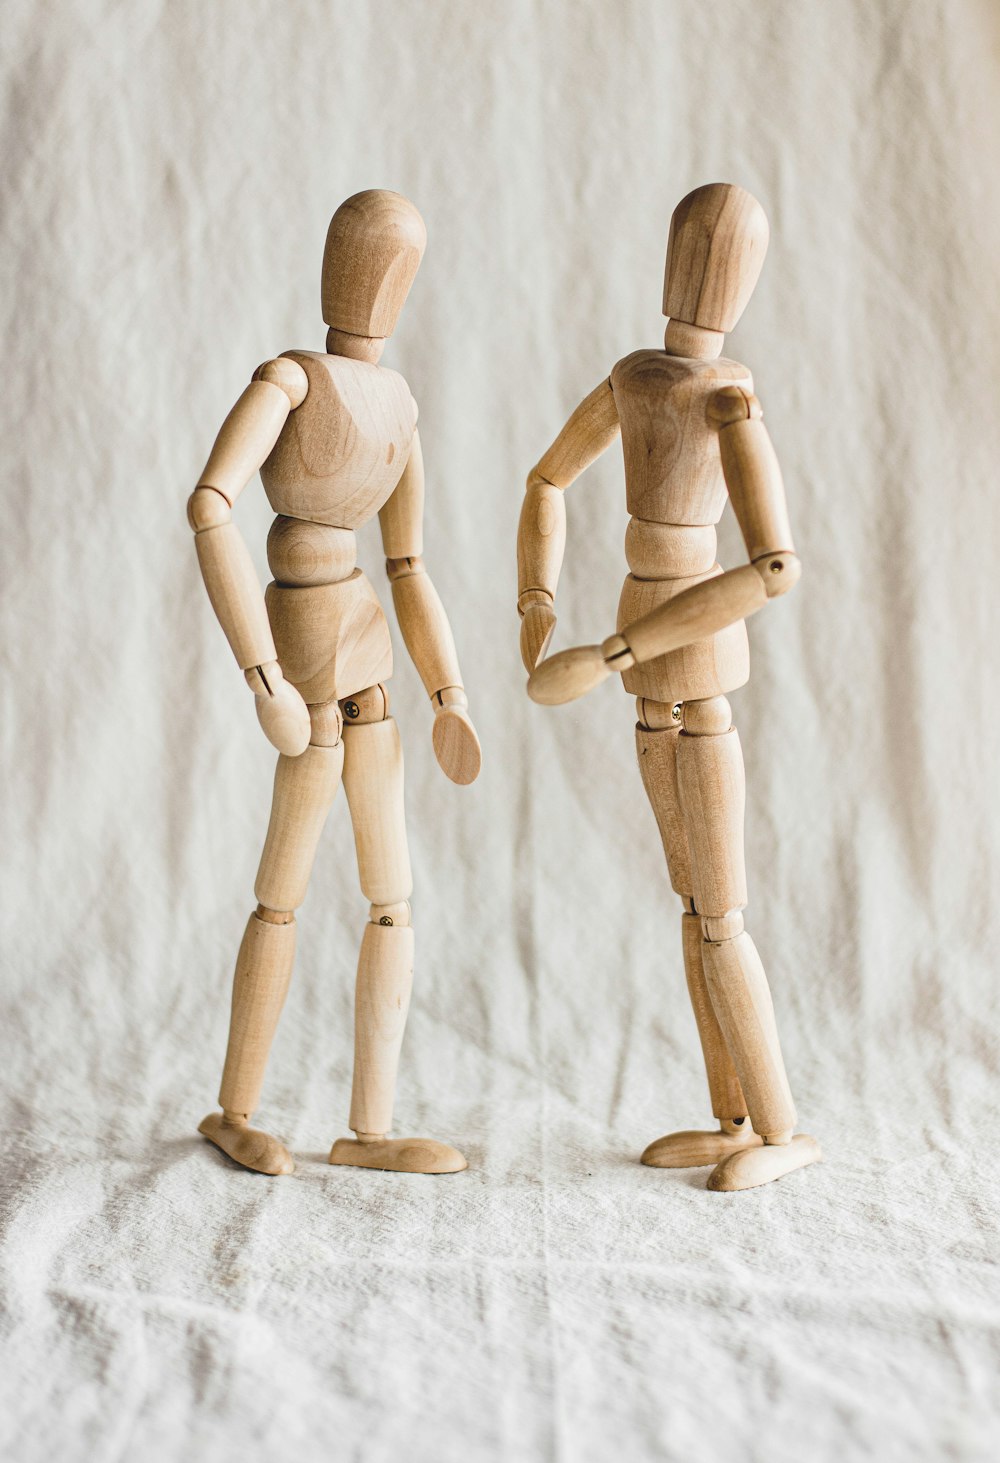 two wooden dolls